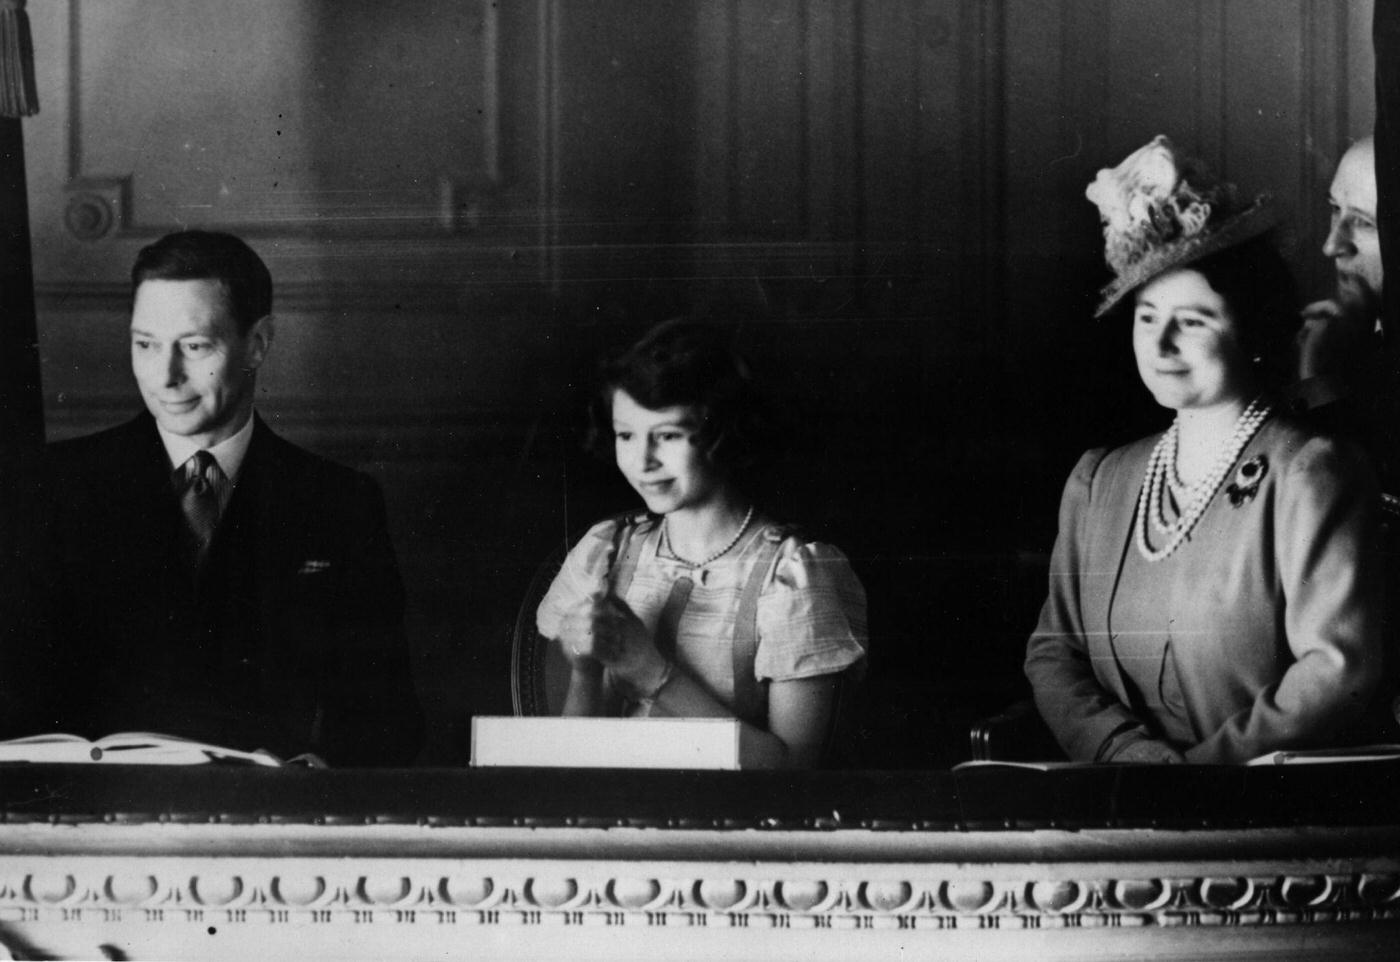 King George VI and Queen Elizabeth watching a performance from a box with Princess Elizabeth at the Coliseum Theatre, London, March 28th, 1939.